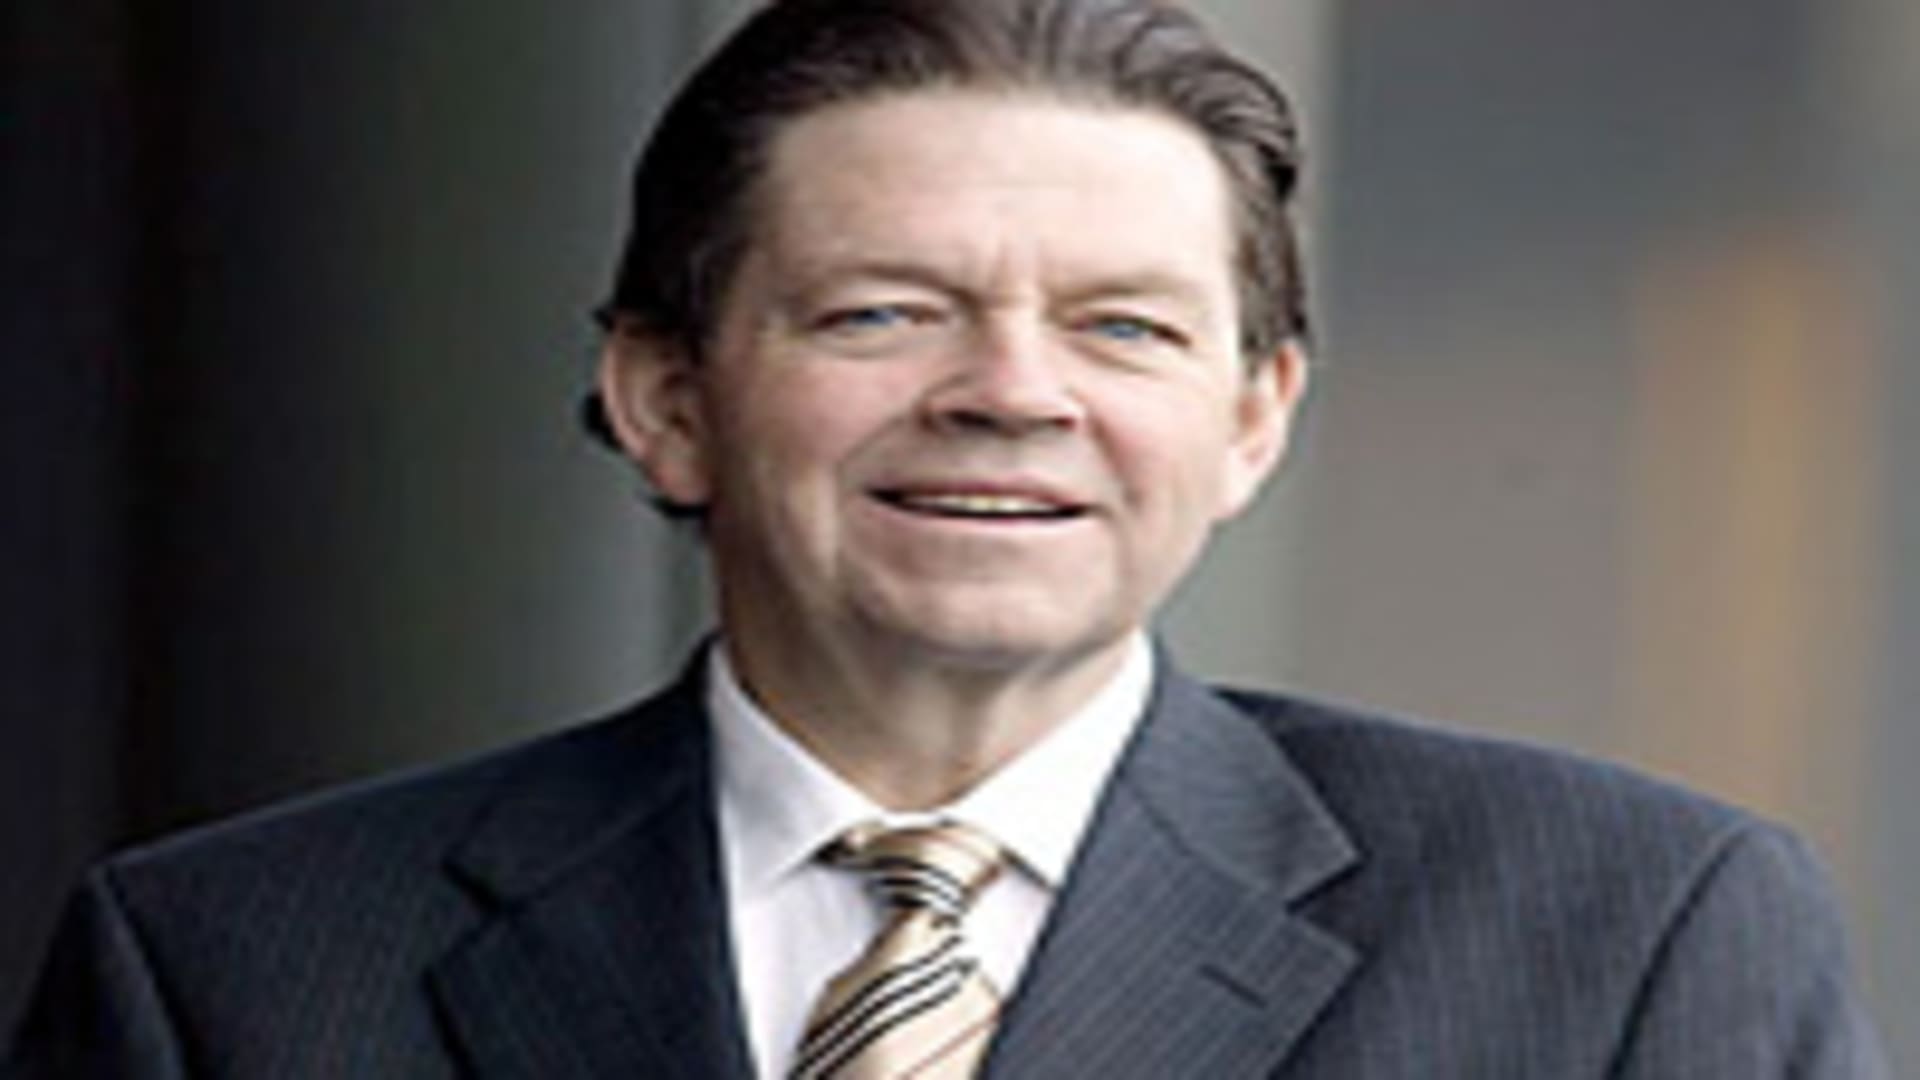 Arthur Laffer, former economic advisor to the Reagan administration and inventor of the Laffer Curve.